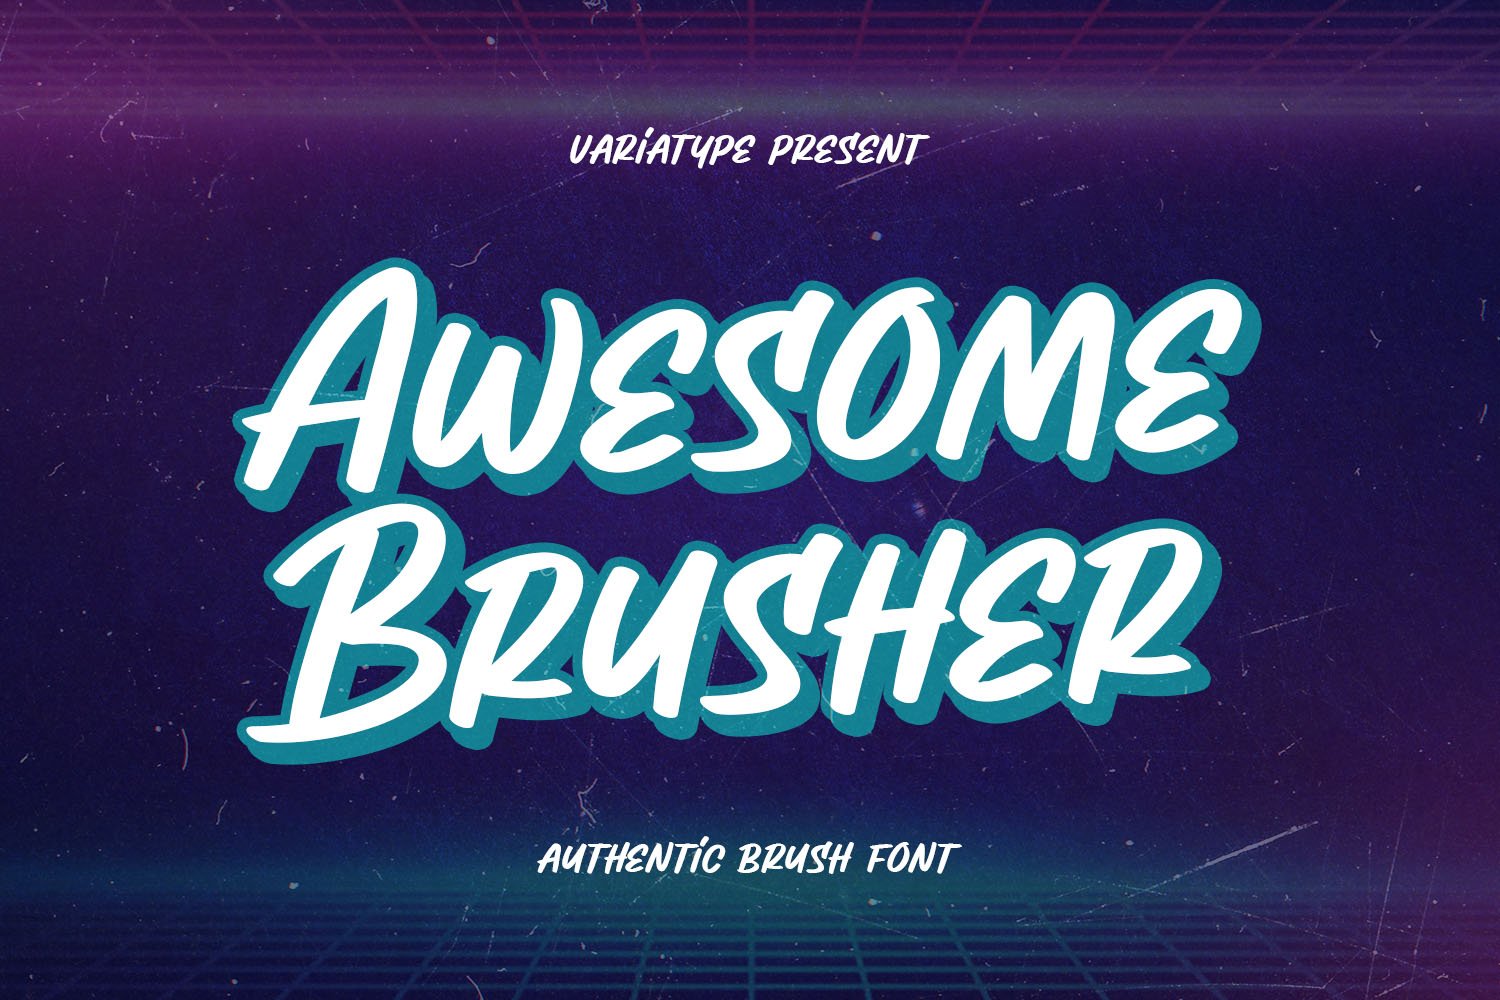 Awesome Brusher - Street Brush Font cover image.